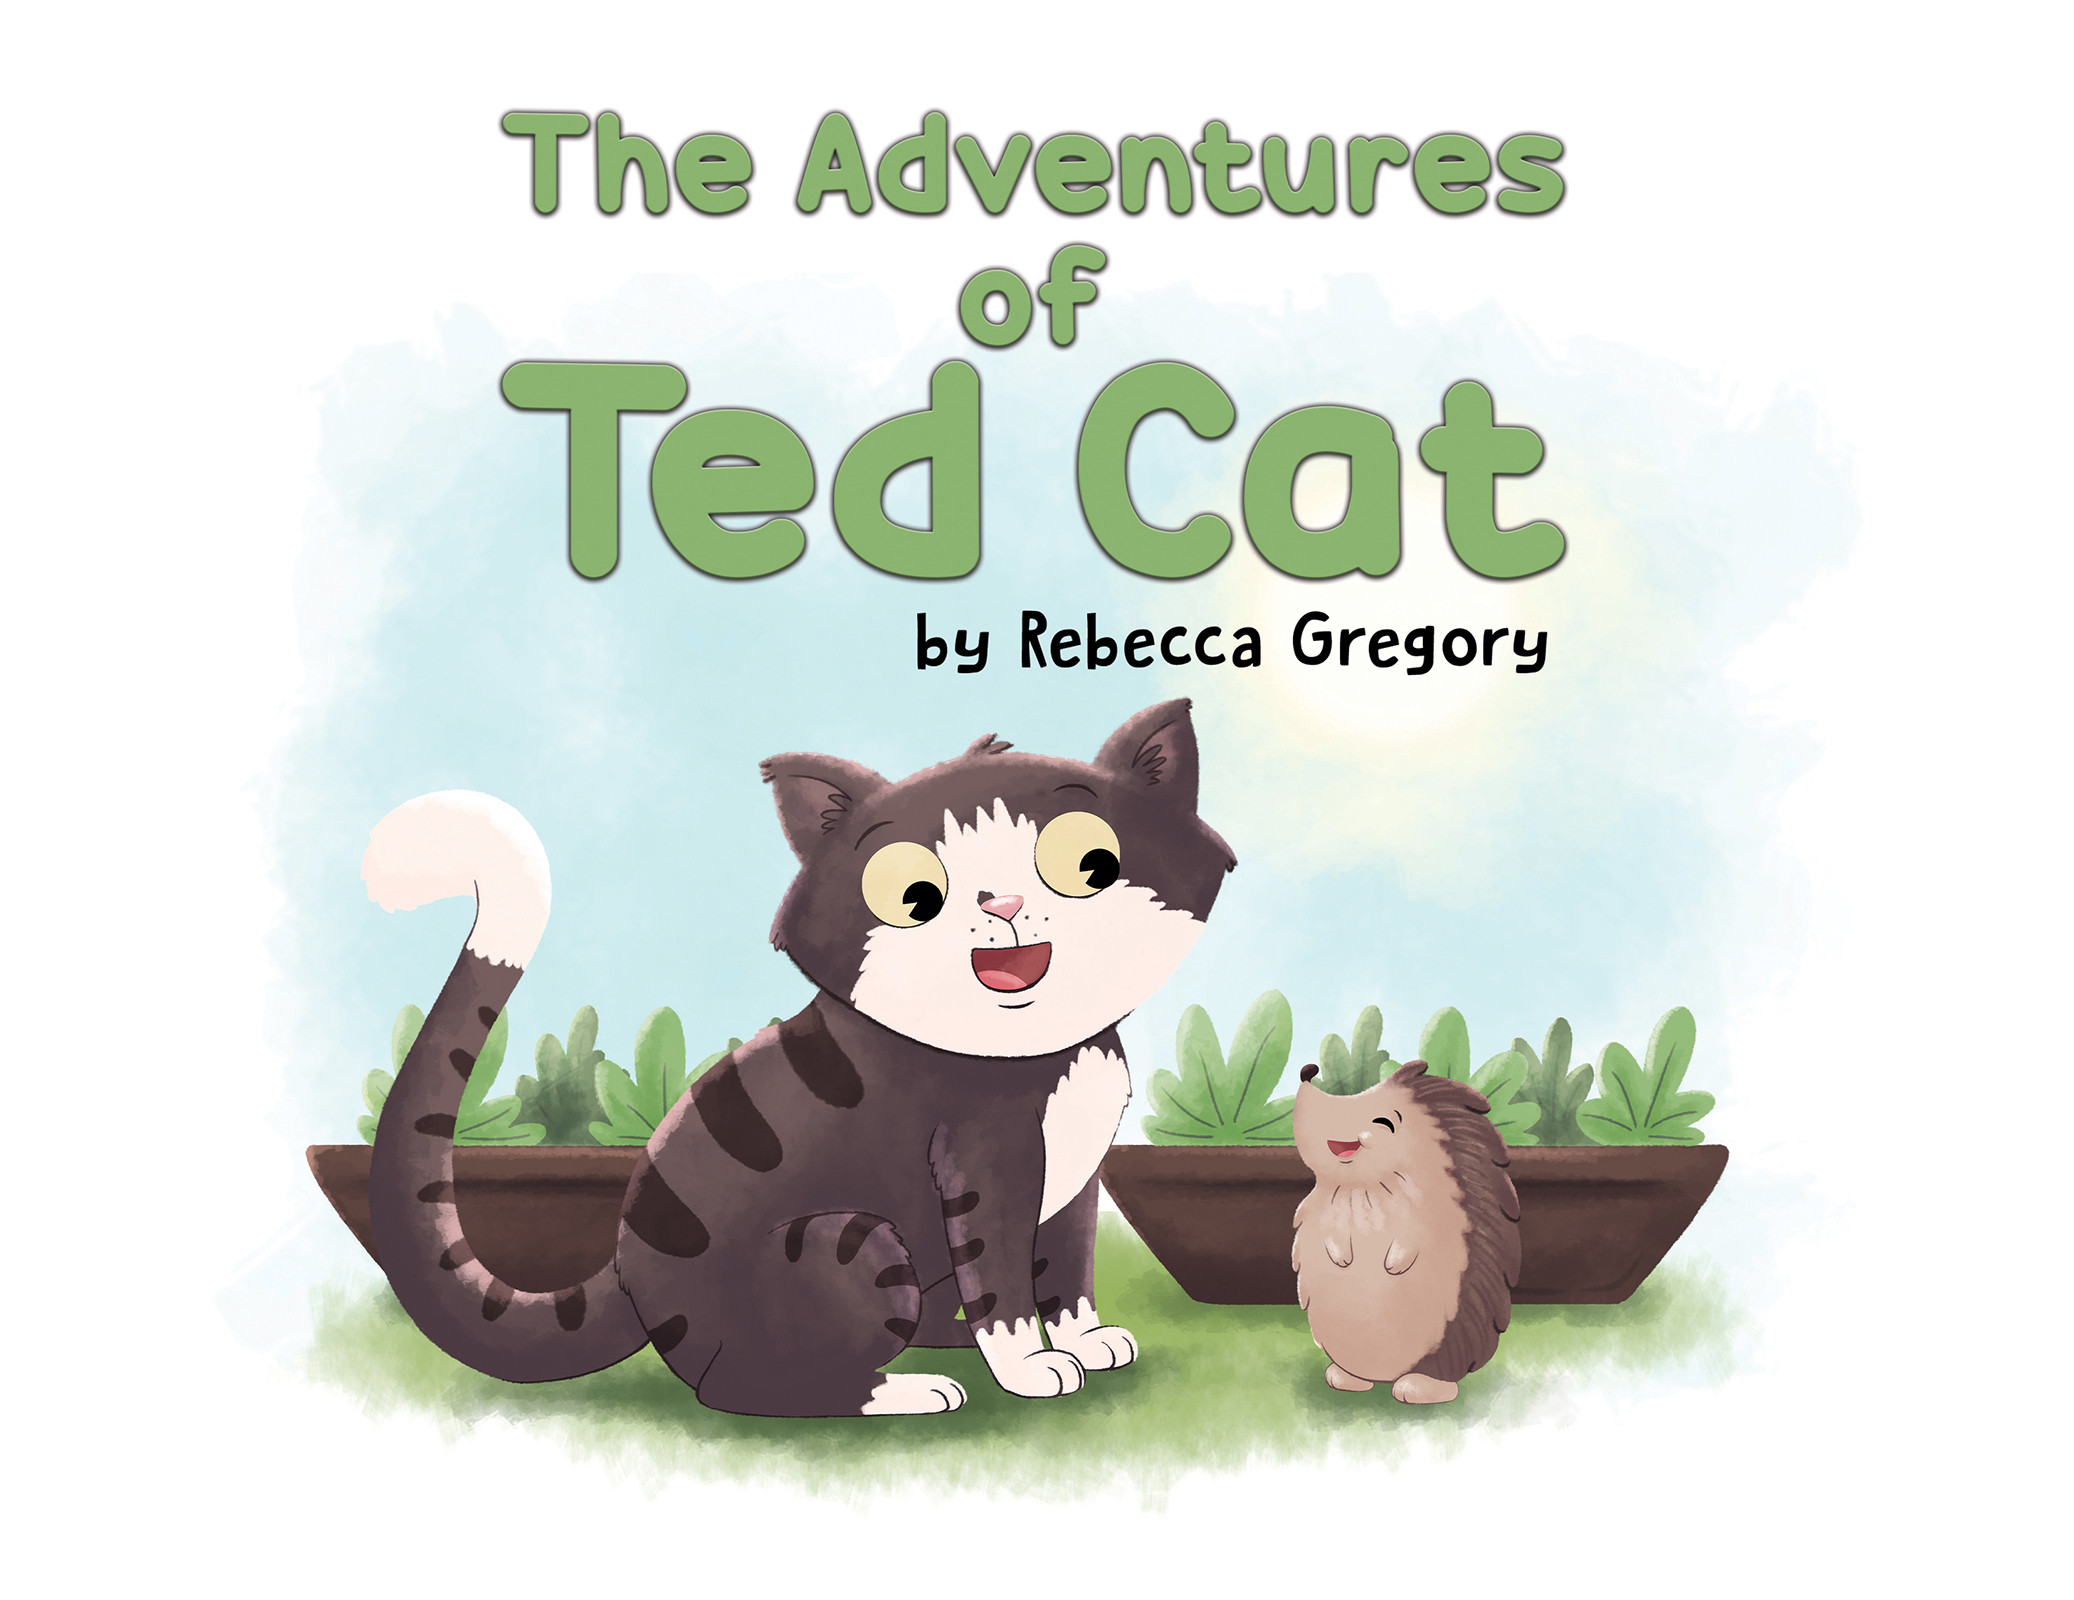 The Adventures of Ted Cat